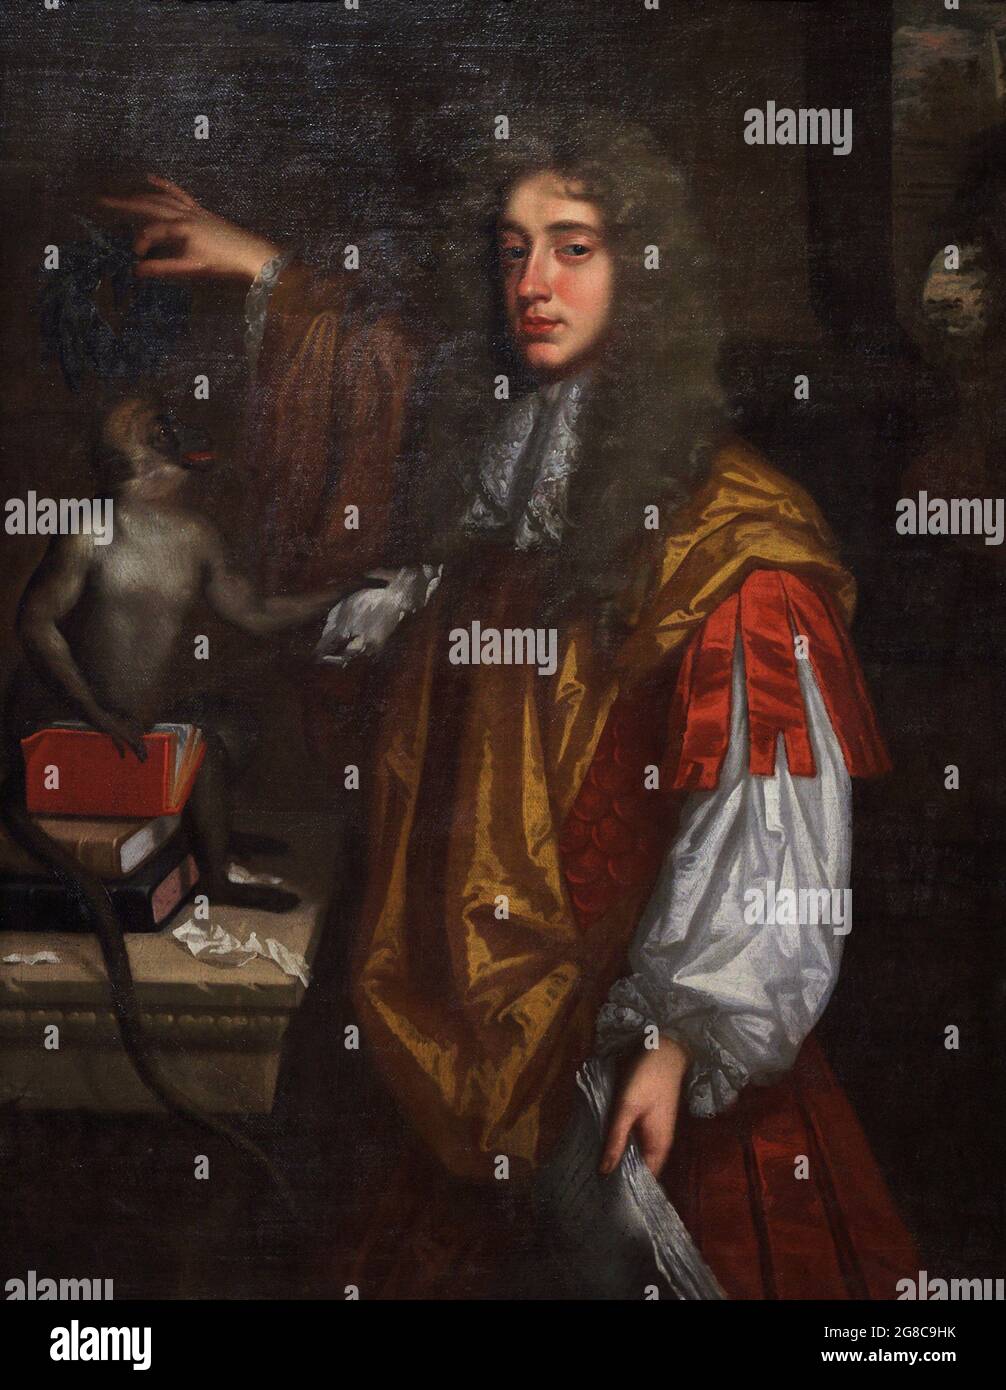 John Wilmot, 2nd Earl of Rochester (1647-1680). English poet. Portrait by an unknown artist depicting Wilmot crowning his monkey with laurel, on a pile of books, the monkey offers him a piece of paper with shredded verses. Satirical tone. Oil on canvas (127 x 99,1 cm), ca.1665-1670. National Portrait Gallery. London, England, United Kingdom. Stock Photo